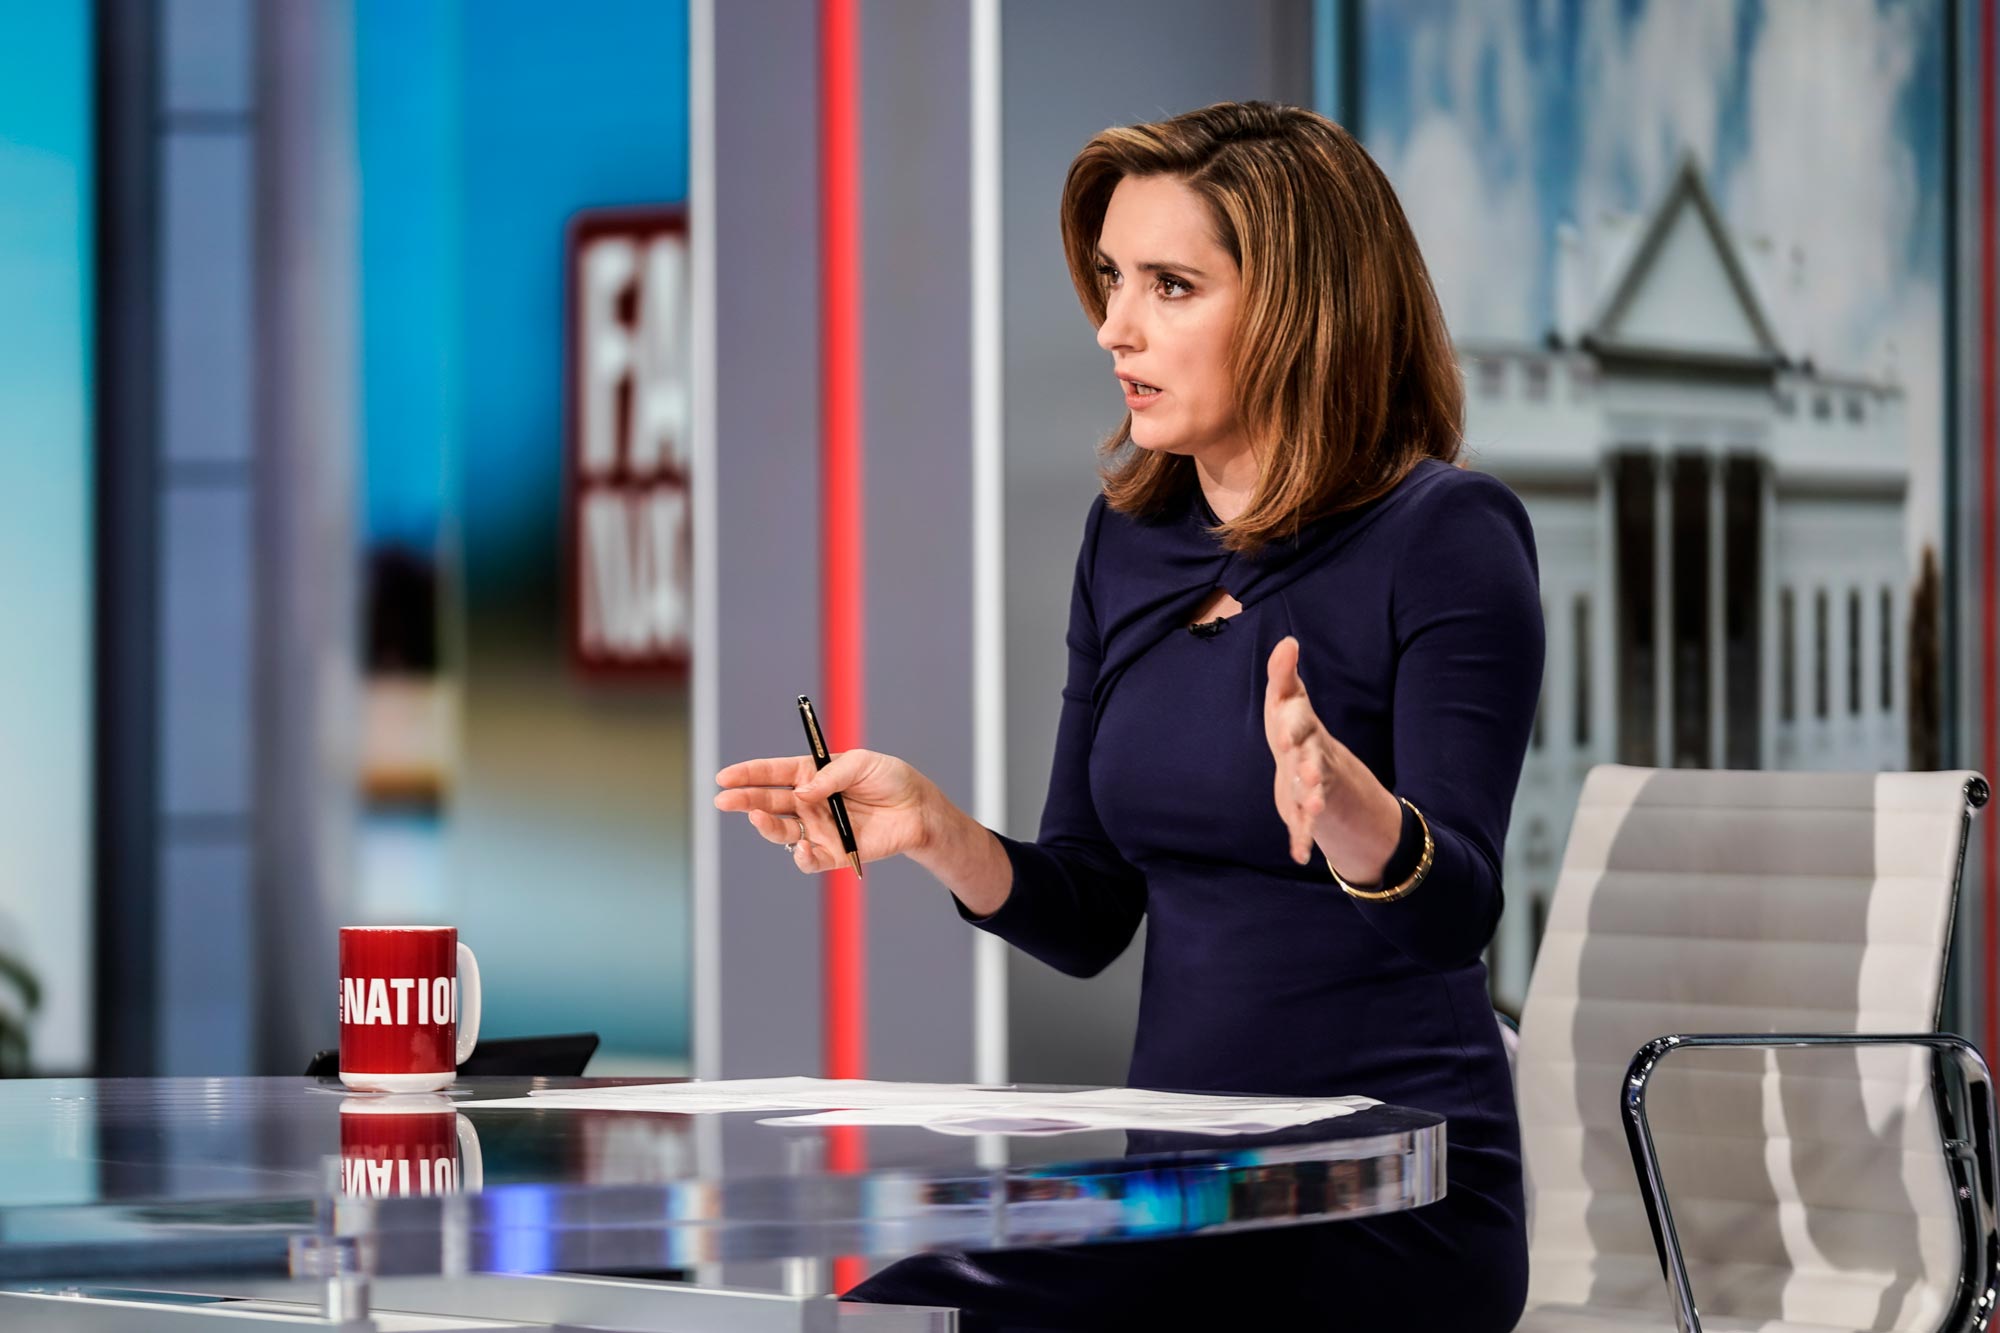 UVA alumna Margaret Brennan seated at a glass desk, talking on CBS News' Face the Nation